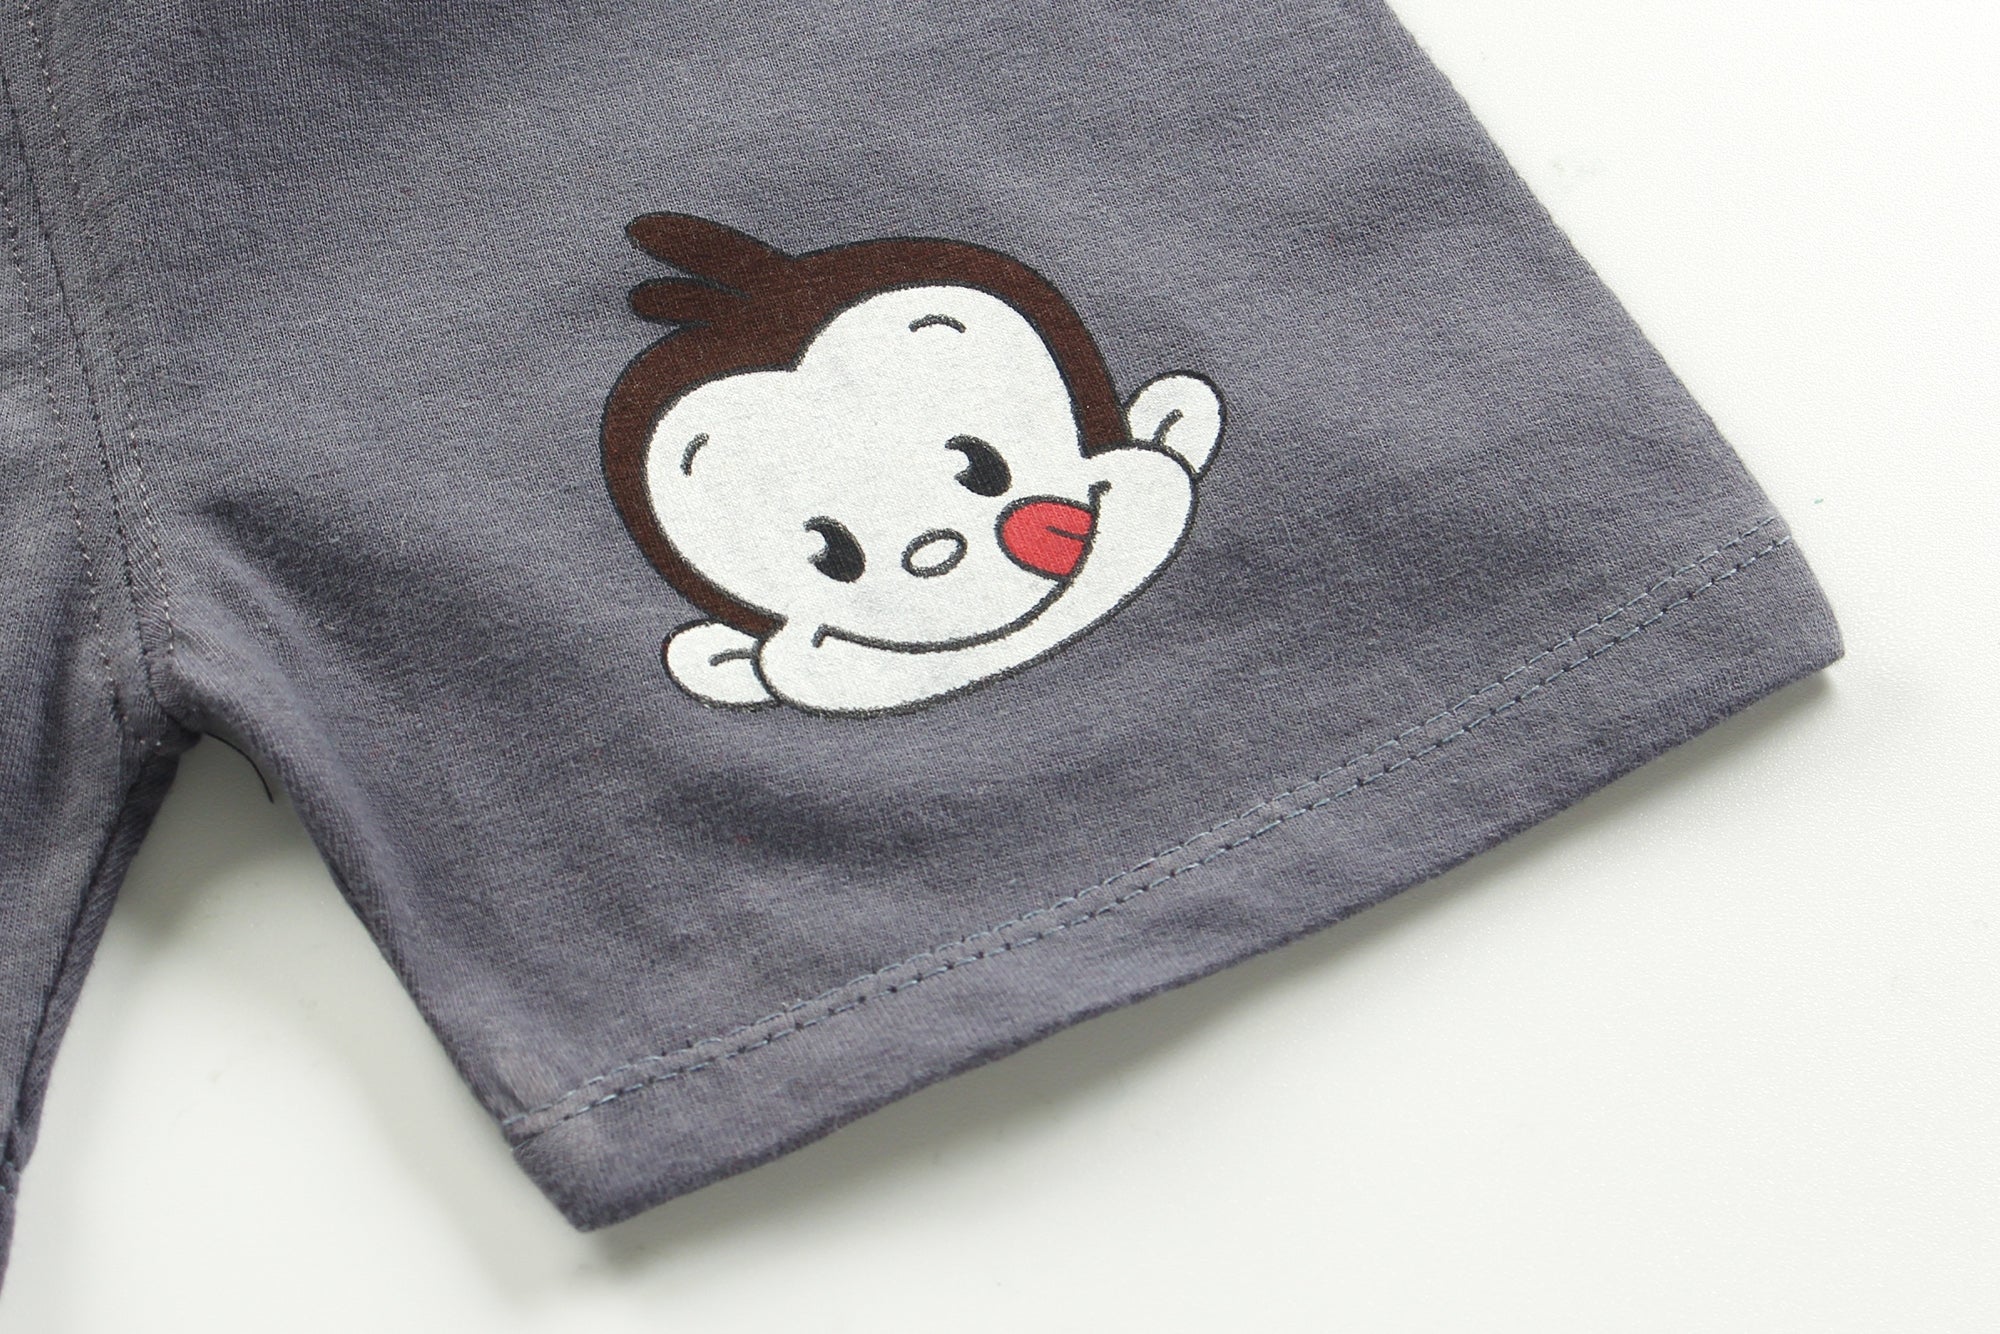 Cute Monkey T-Shirt With Shorts For Kids